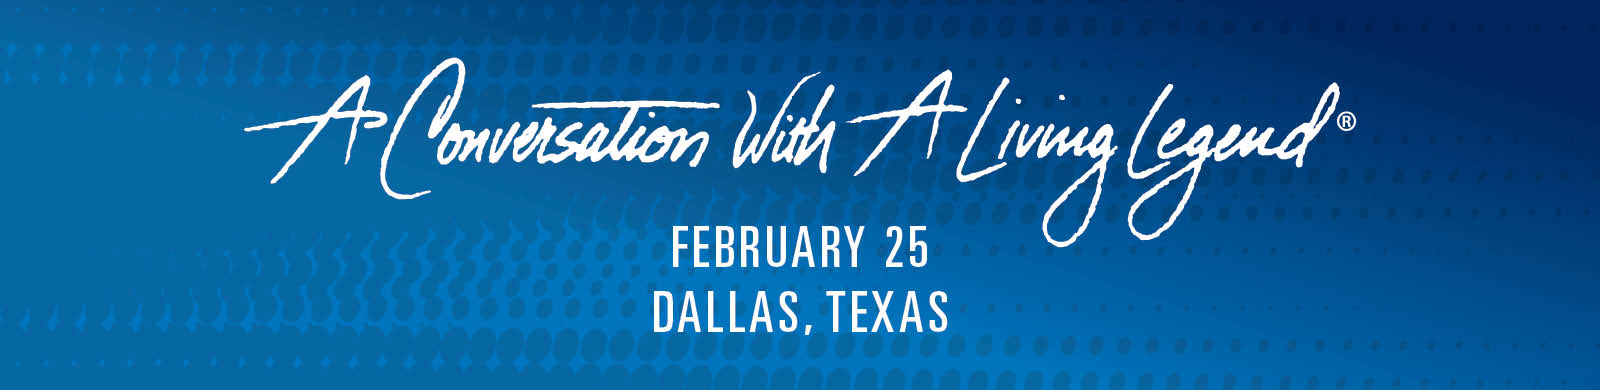 A Conversation With A Living Legend - February 25 Dallas, Texas